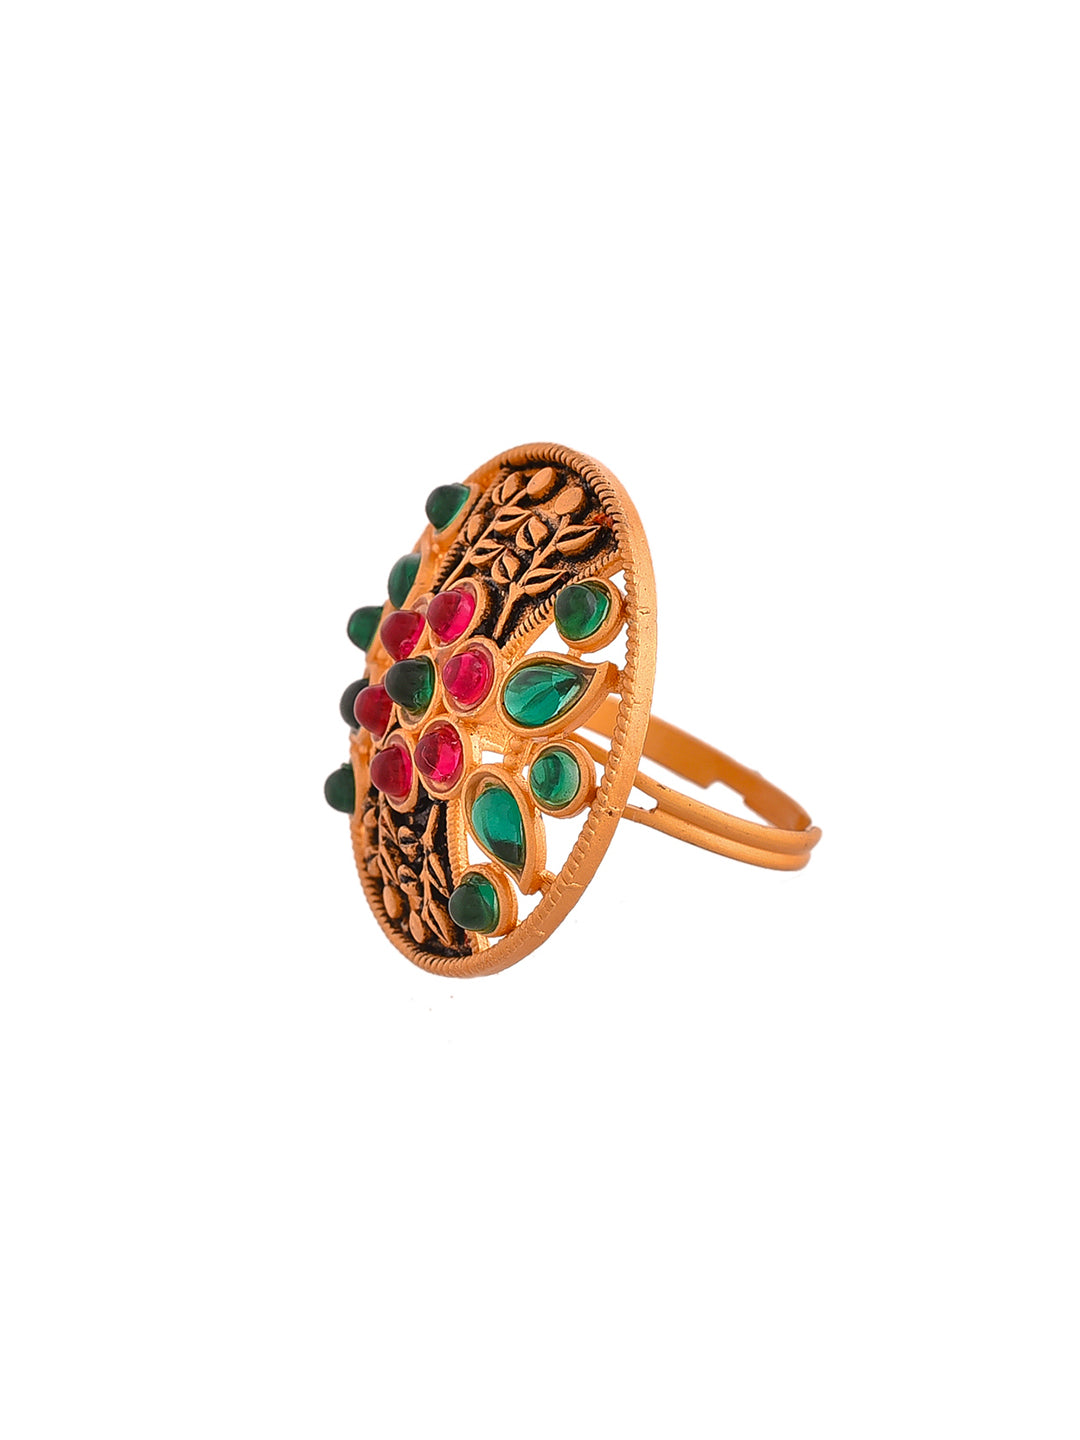 South Indian Artificial Stone Adjustable Finger Ring